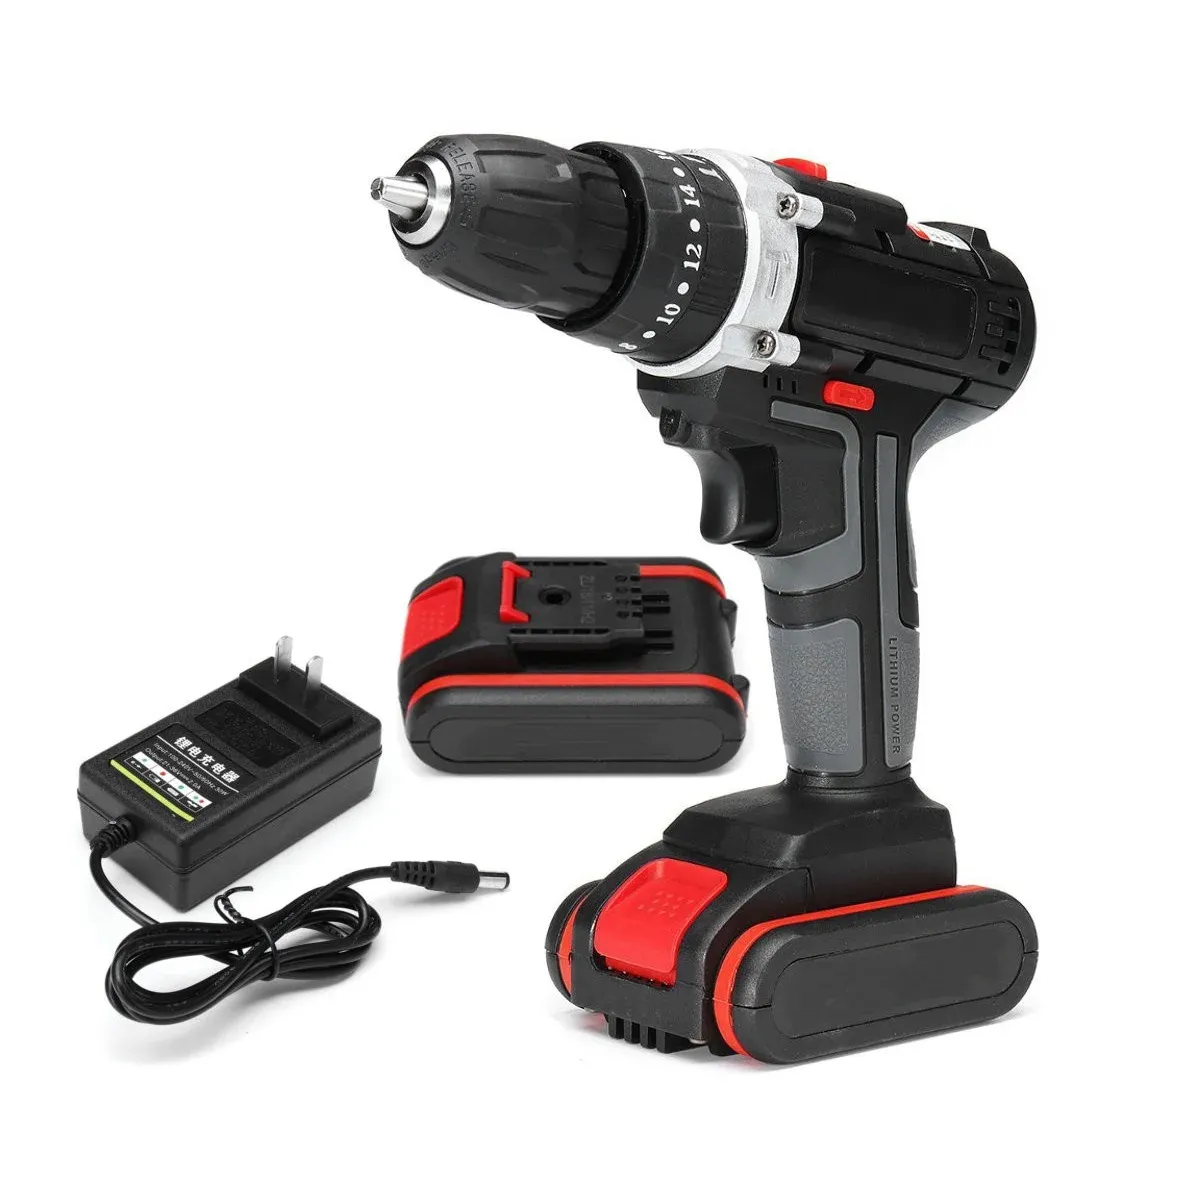 Drill 21V Electric Cordless Screwdriver 3 Functions Wireless Impact Drill 2 Lithiumion Battery Mini Hand Drill Power Tools